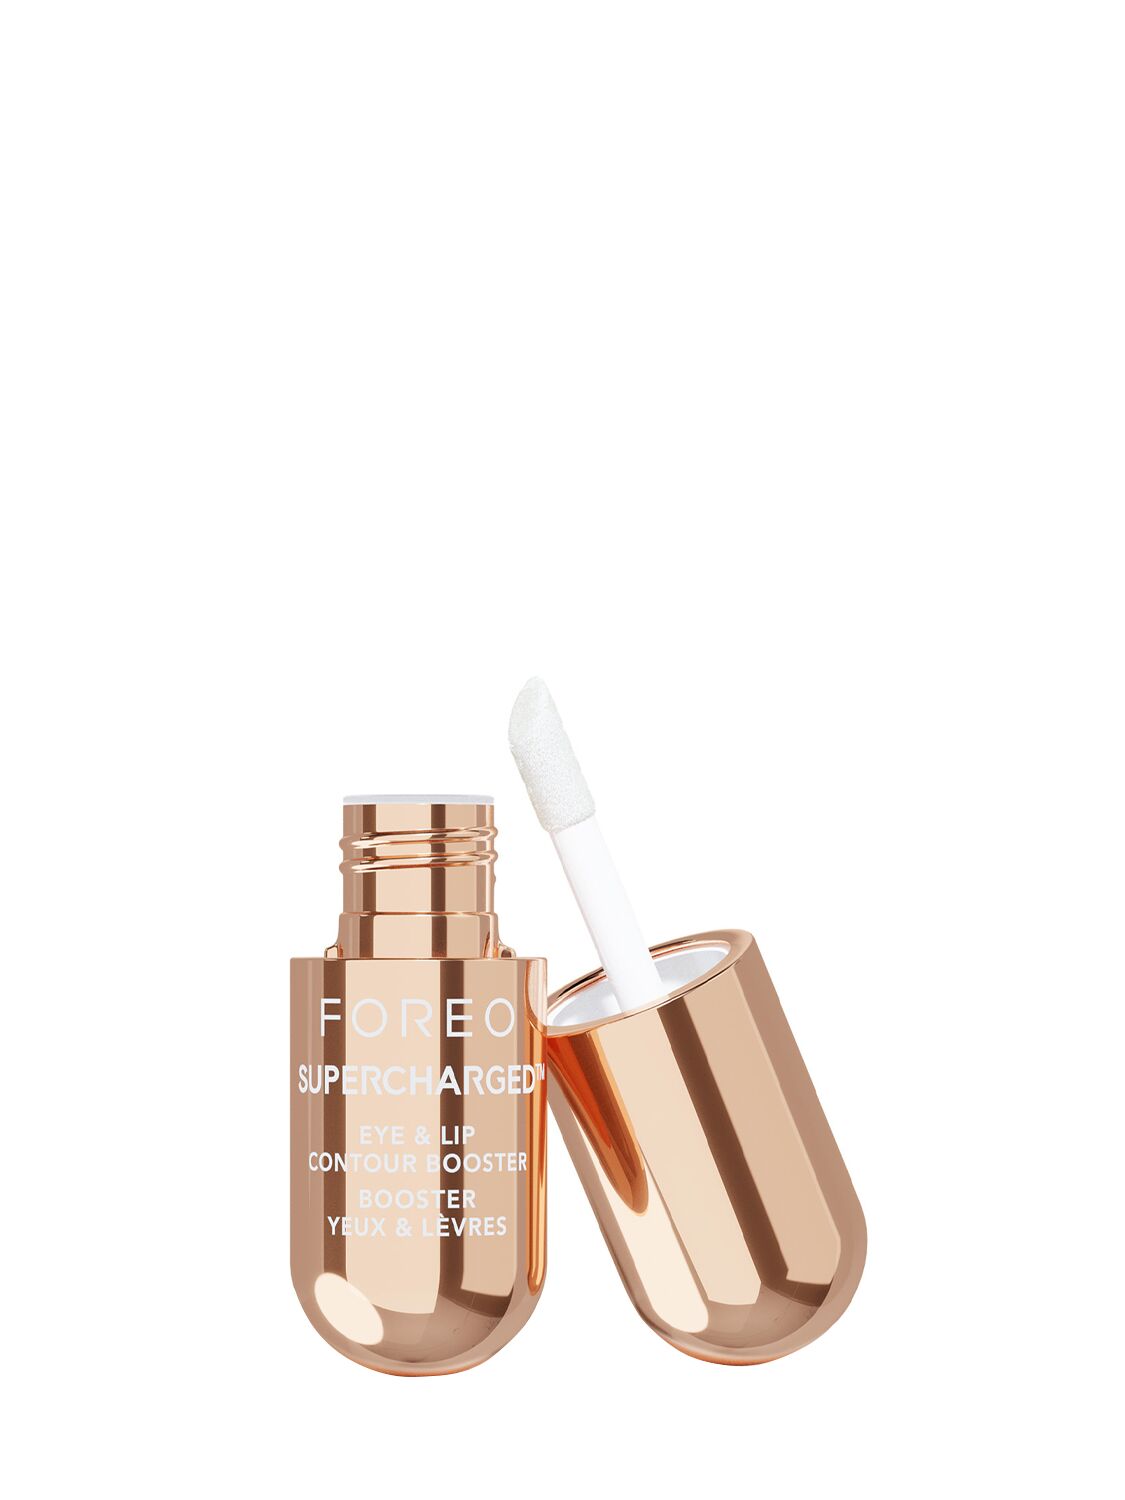 Image of Supercharged Eye & Lip Contour Booster